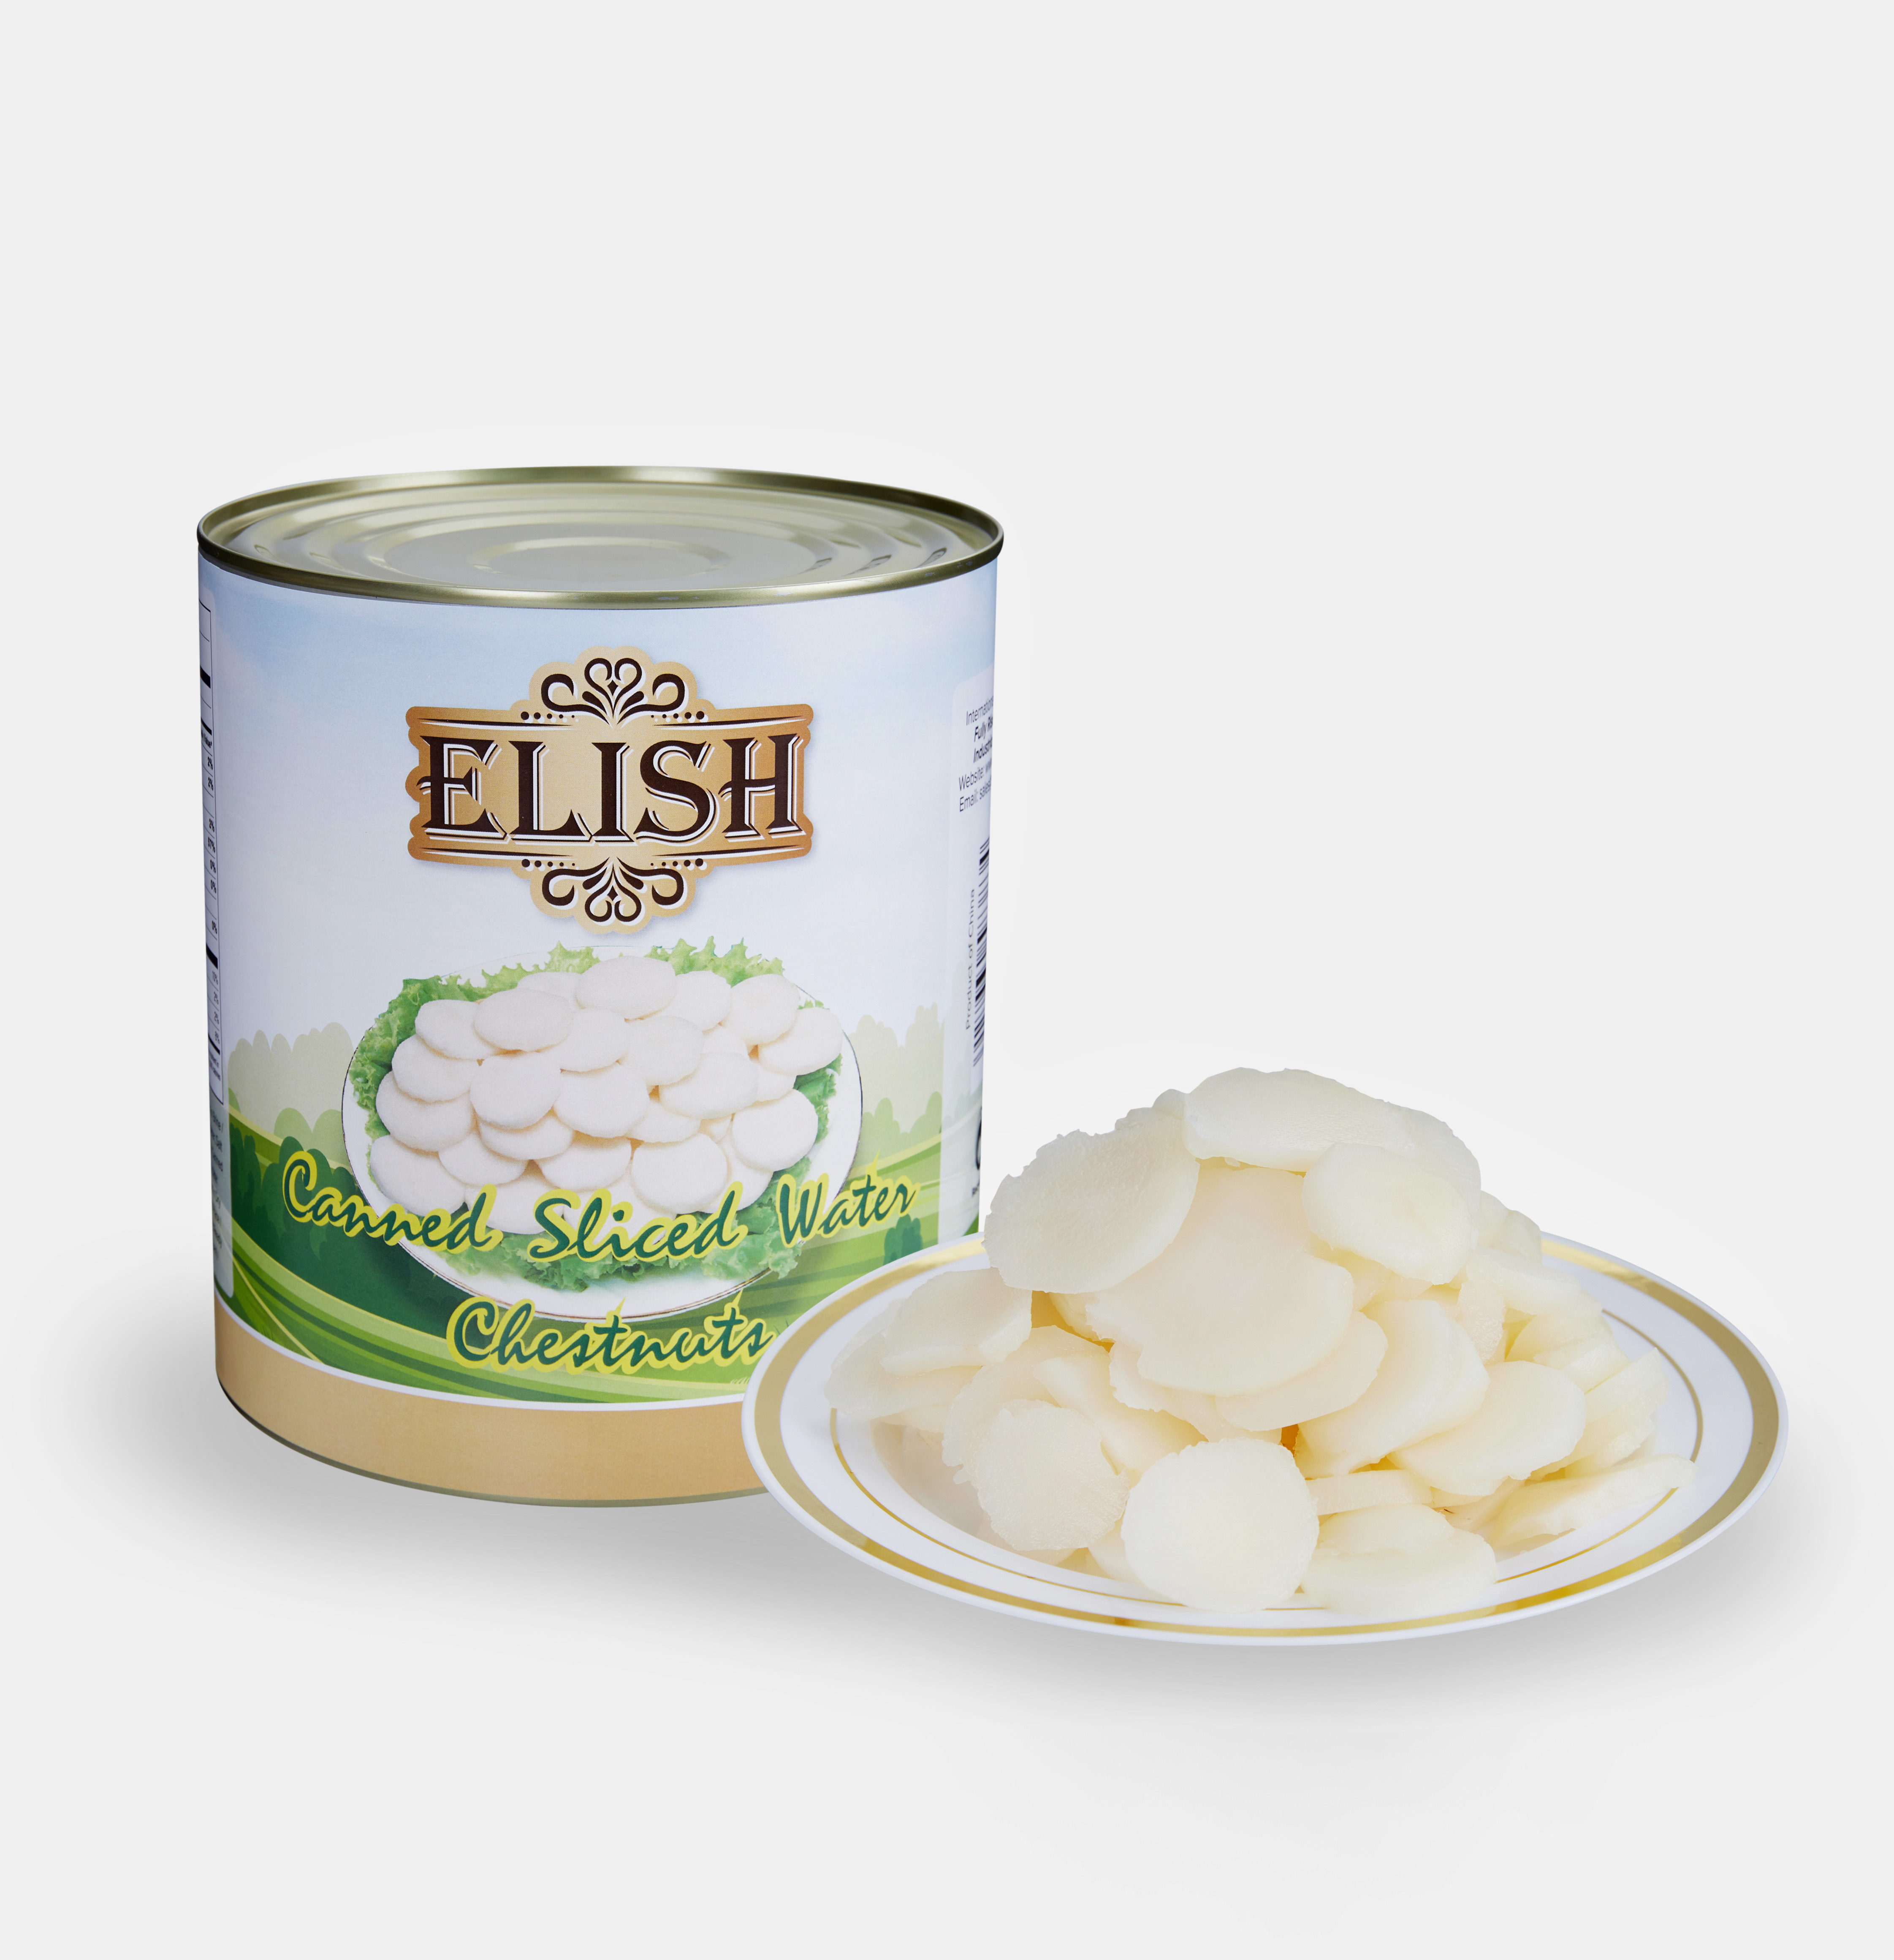 Canned Sliced Water Chestnuts